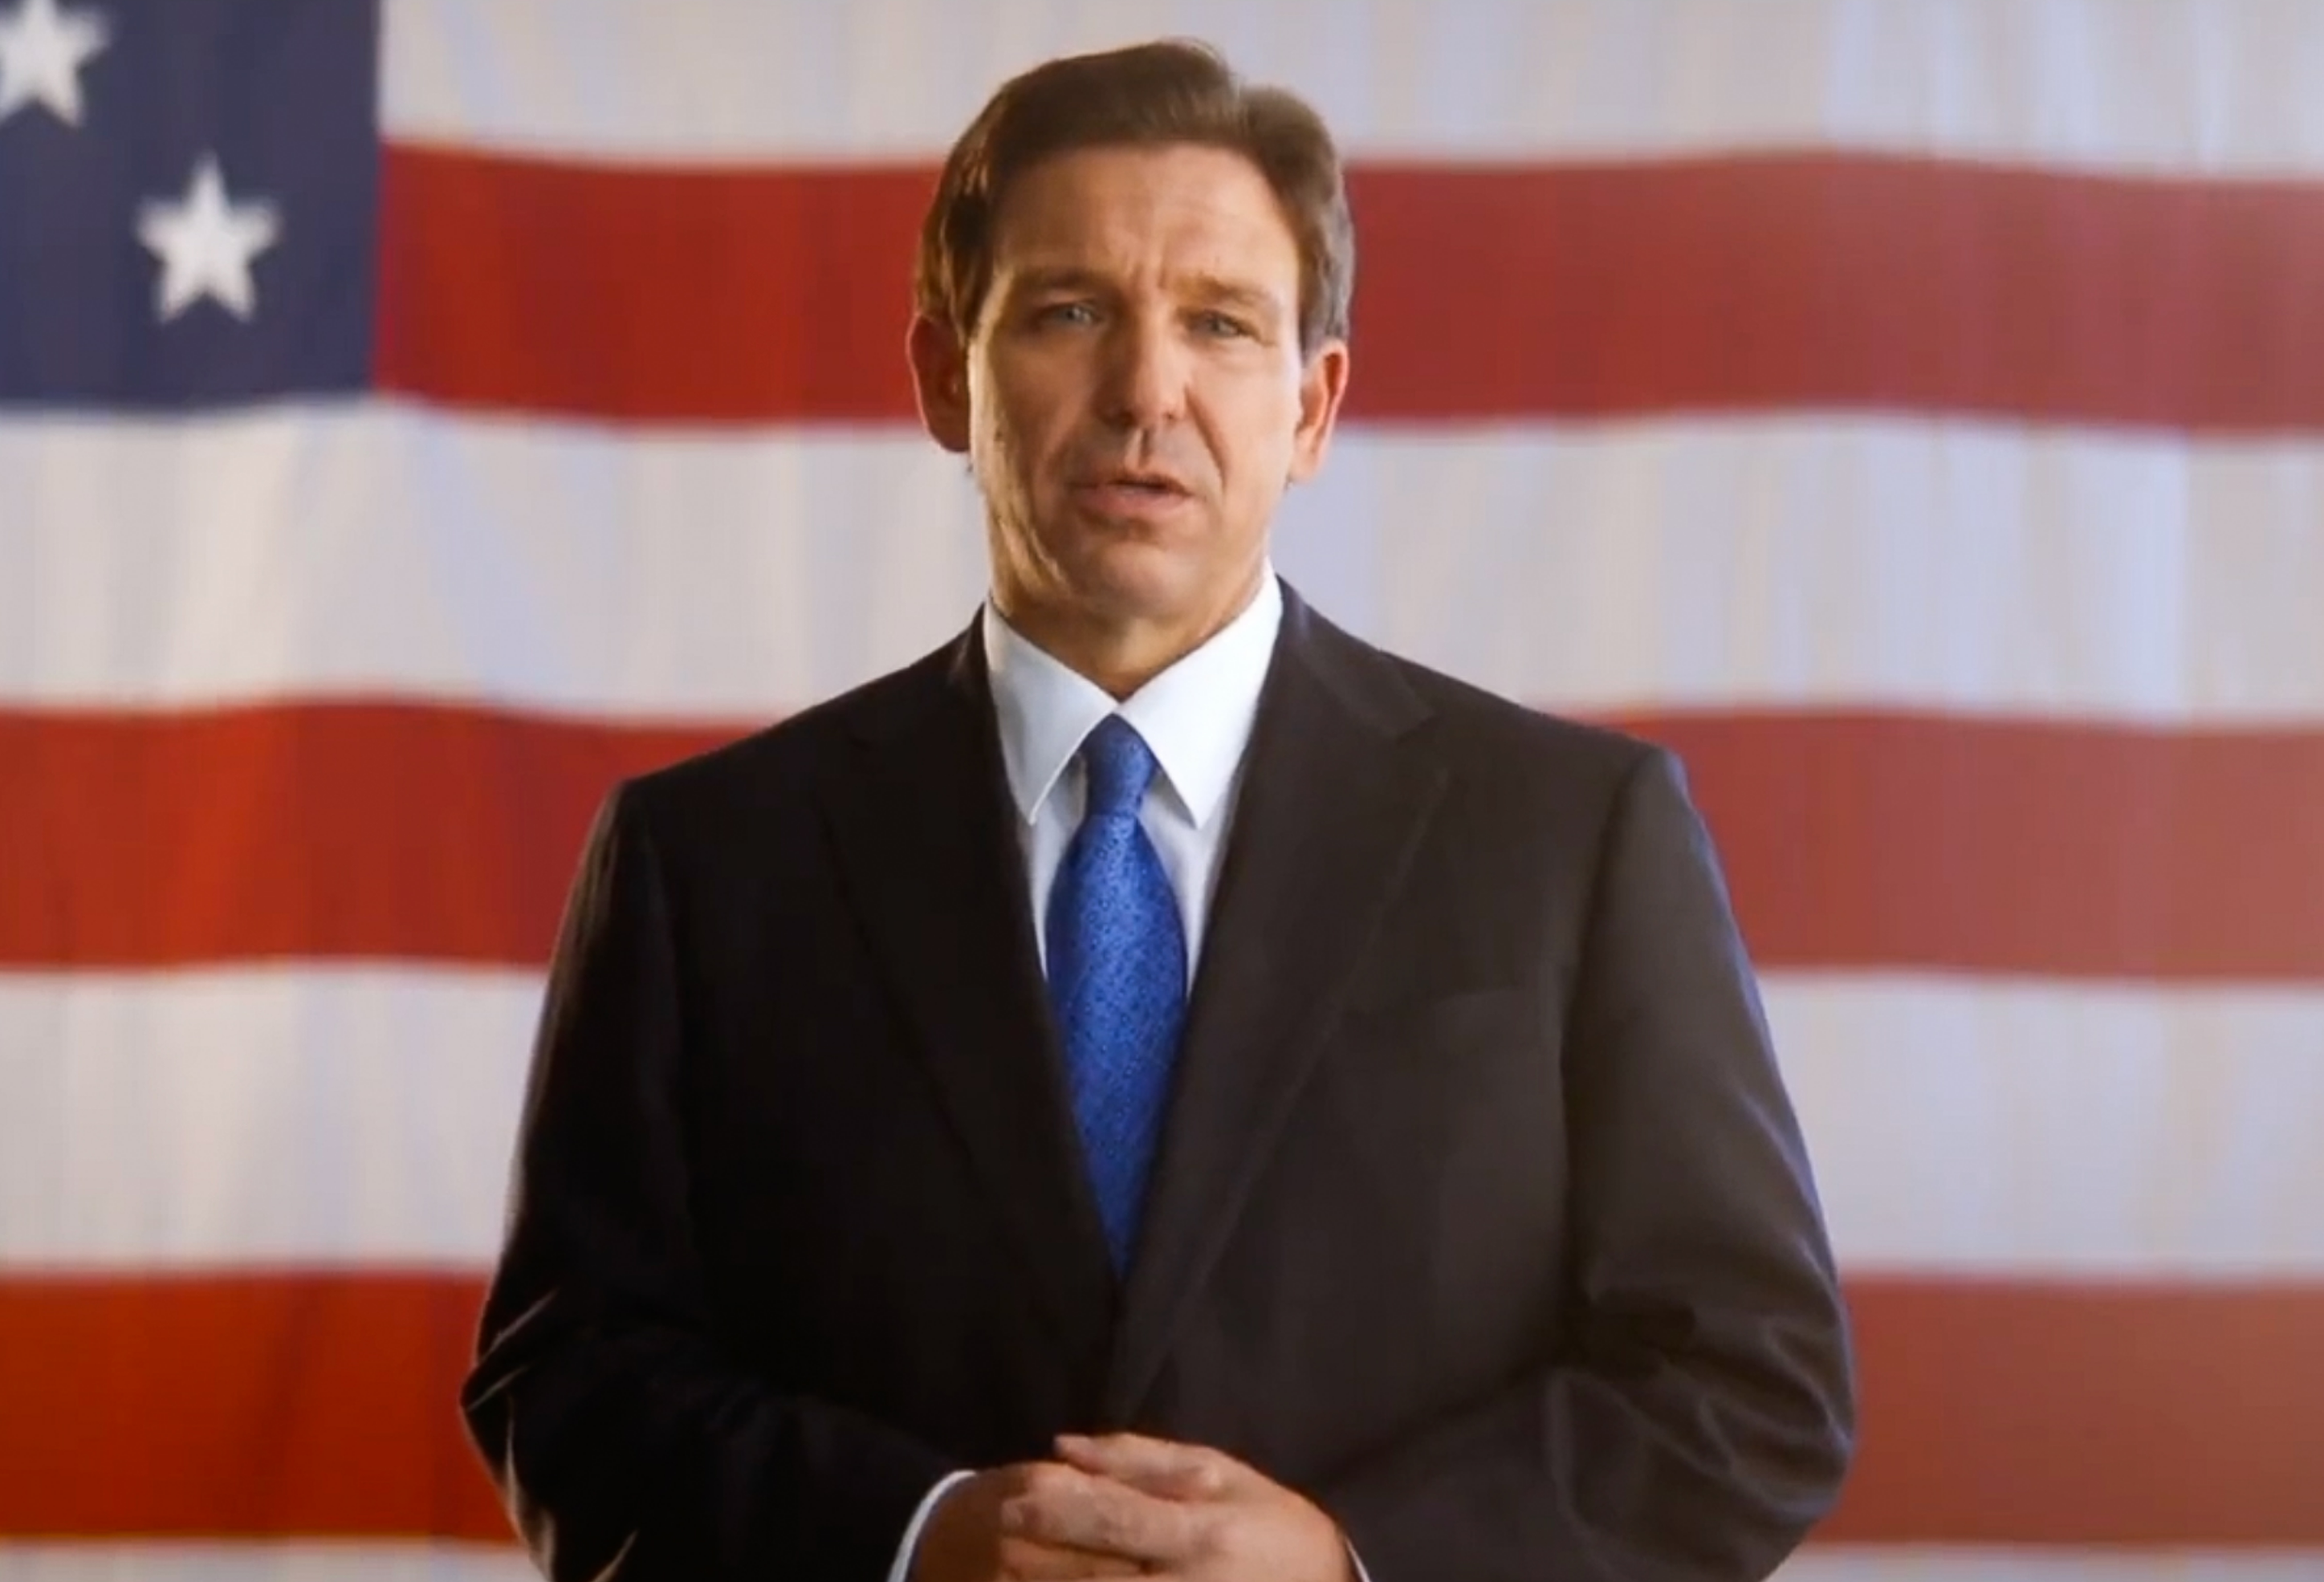 Ron DeSantis has announced for President of the United States. Photo courtesy of @RonDeSantis Twitter